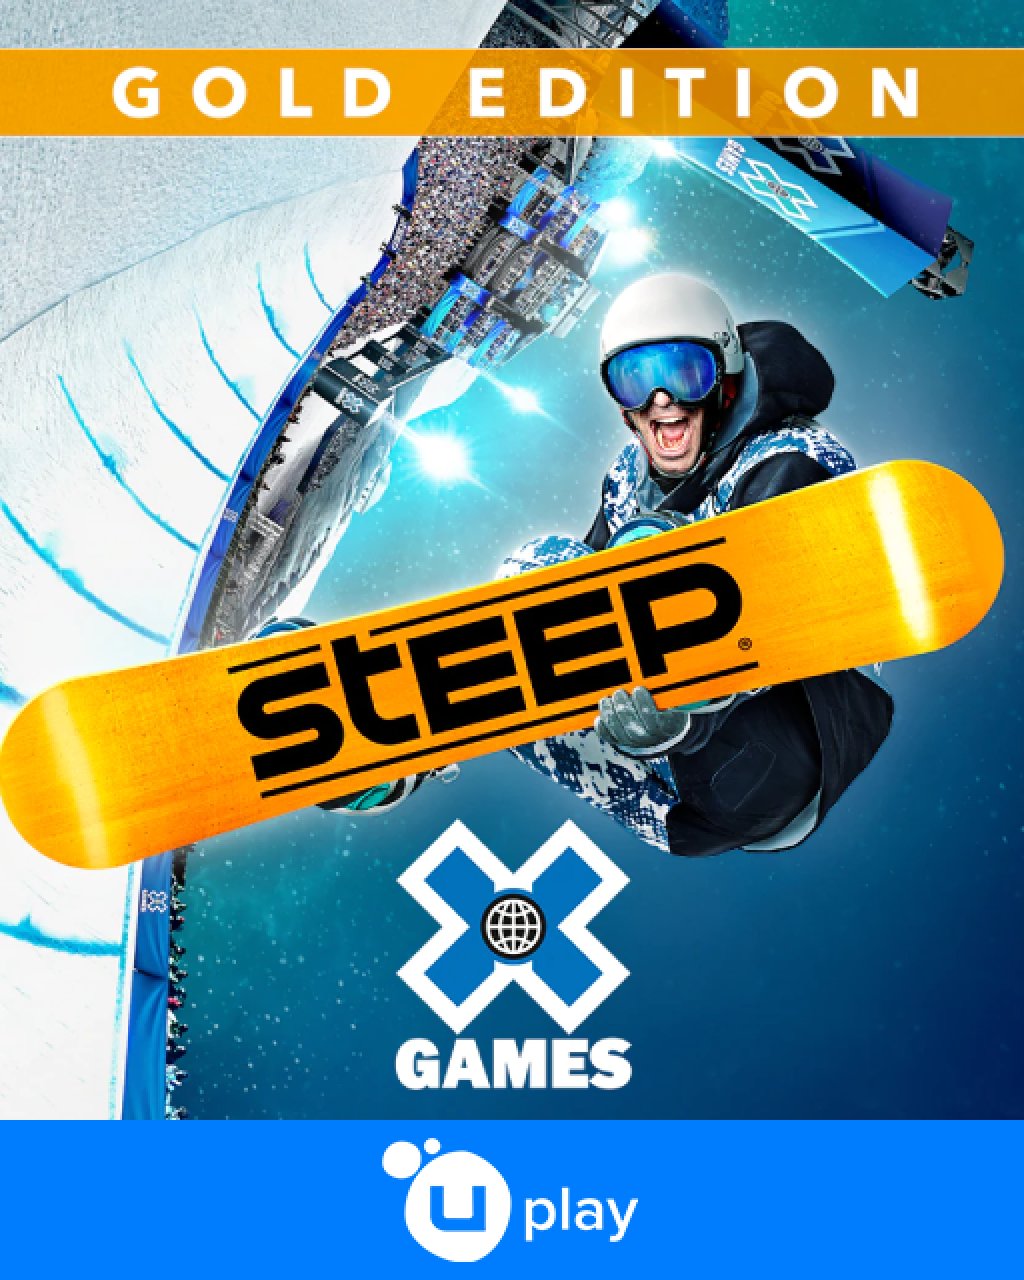 ESD Steep X Games Gold Edition